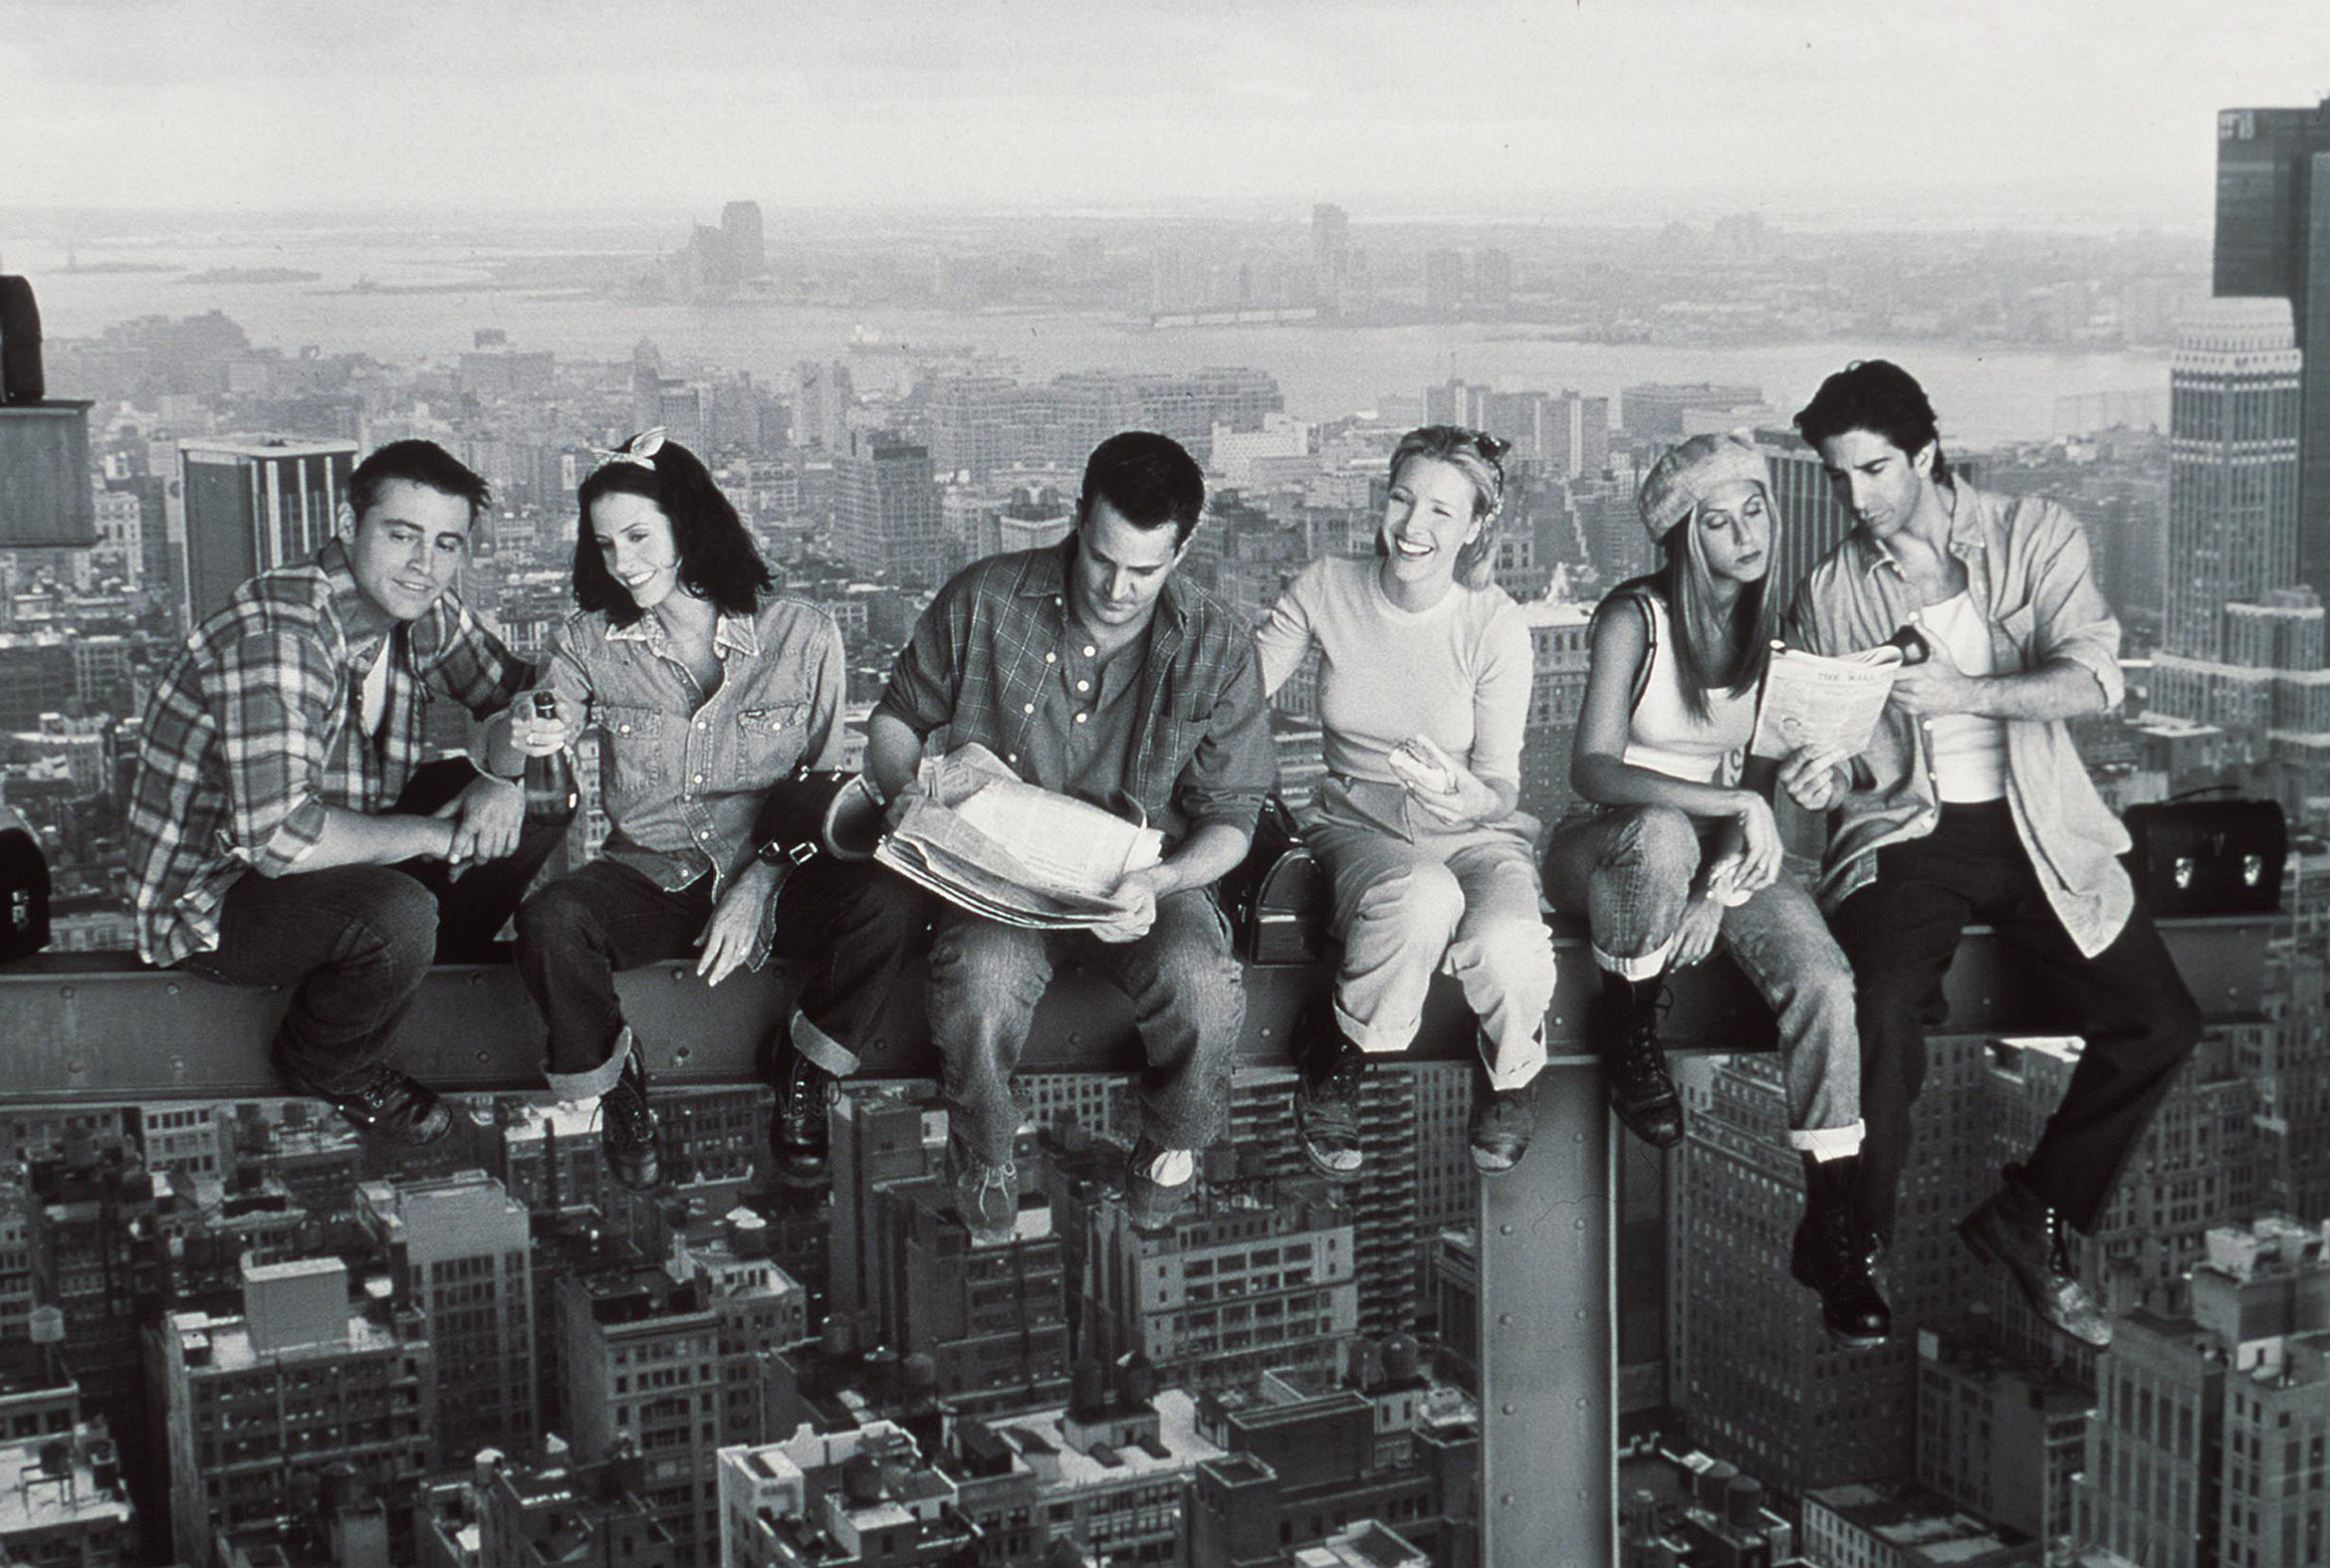 _Friends_ Cast on perched on building overlooking New York